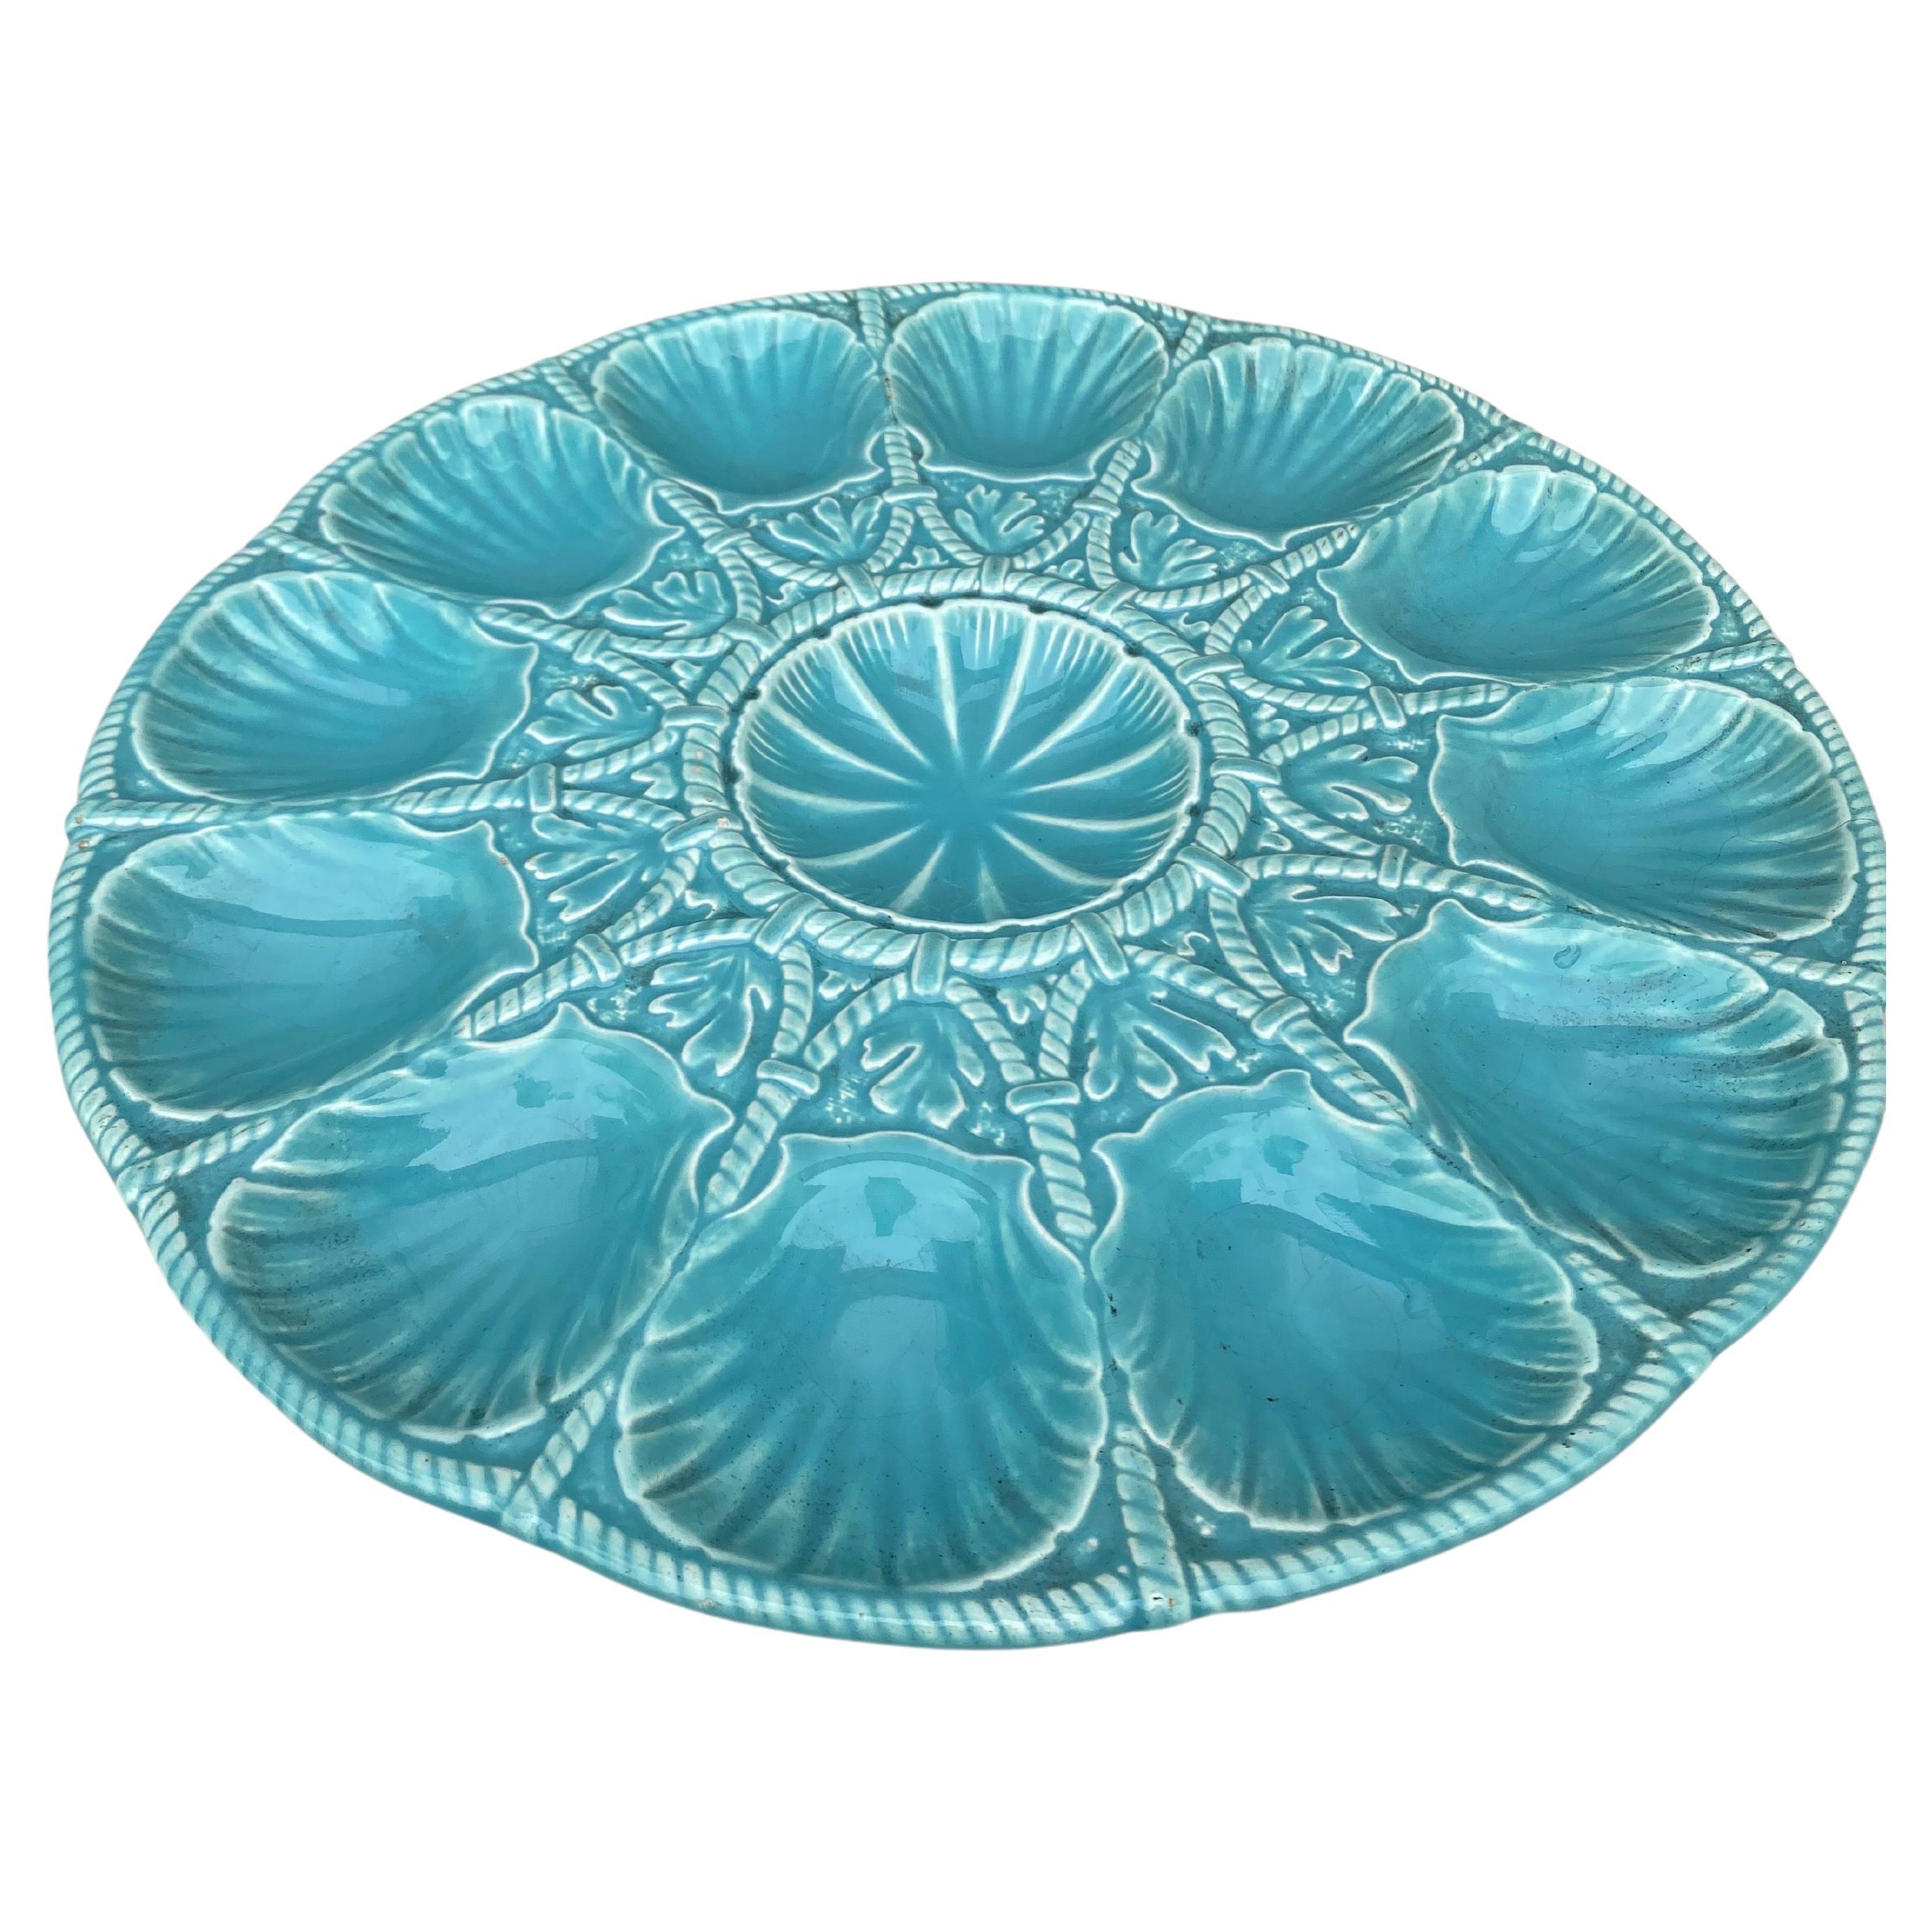 Oversize 19th Century Majolica turquoise aqua oyster platter signed Sarreguemines.
The platter have 12 shells between rope pattern and seaweeds.
 